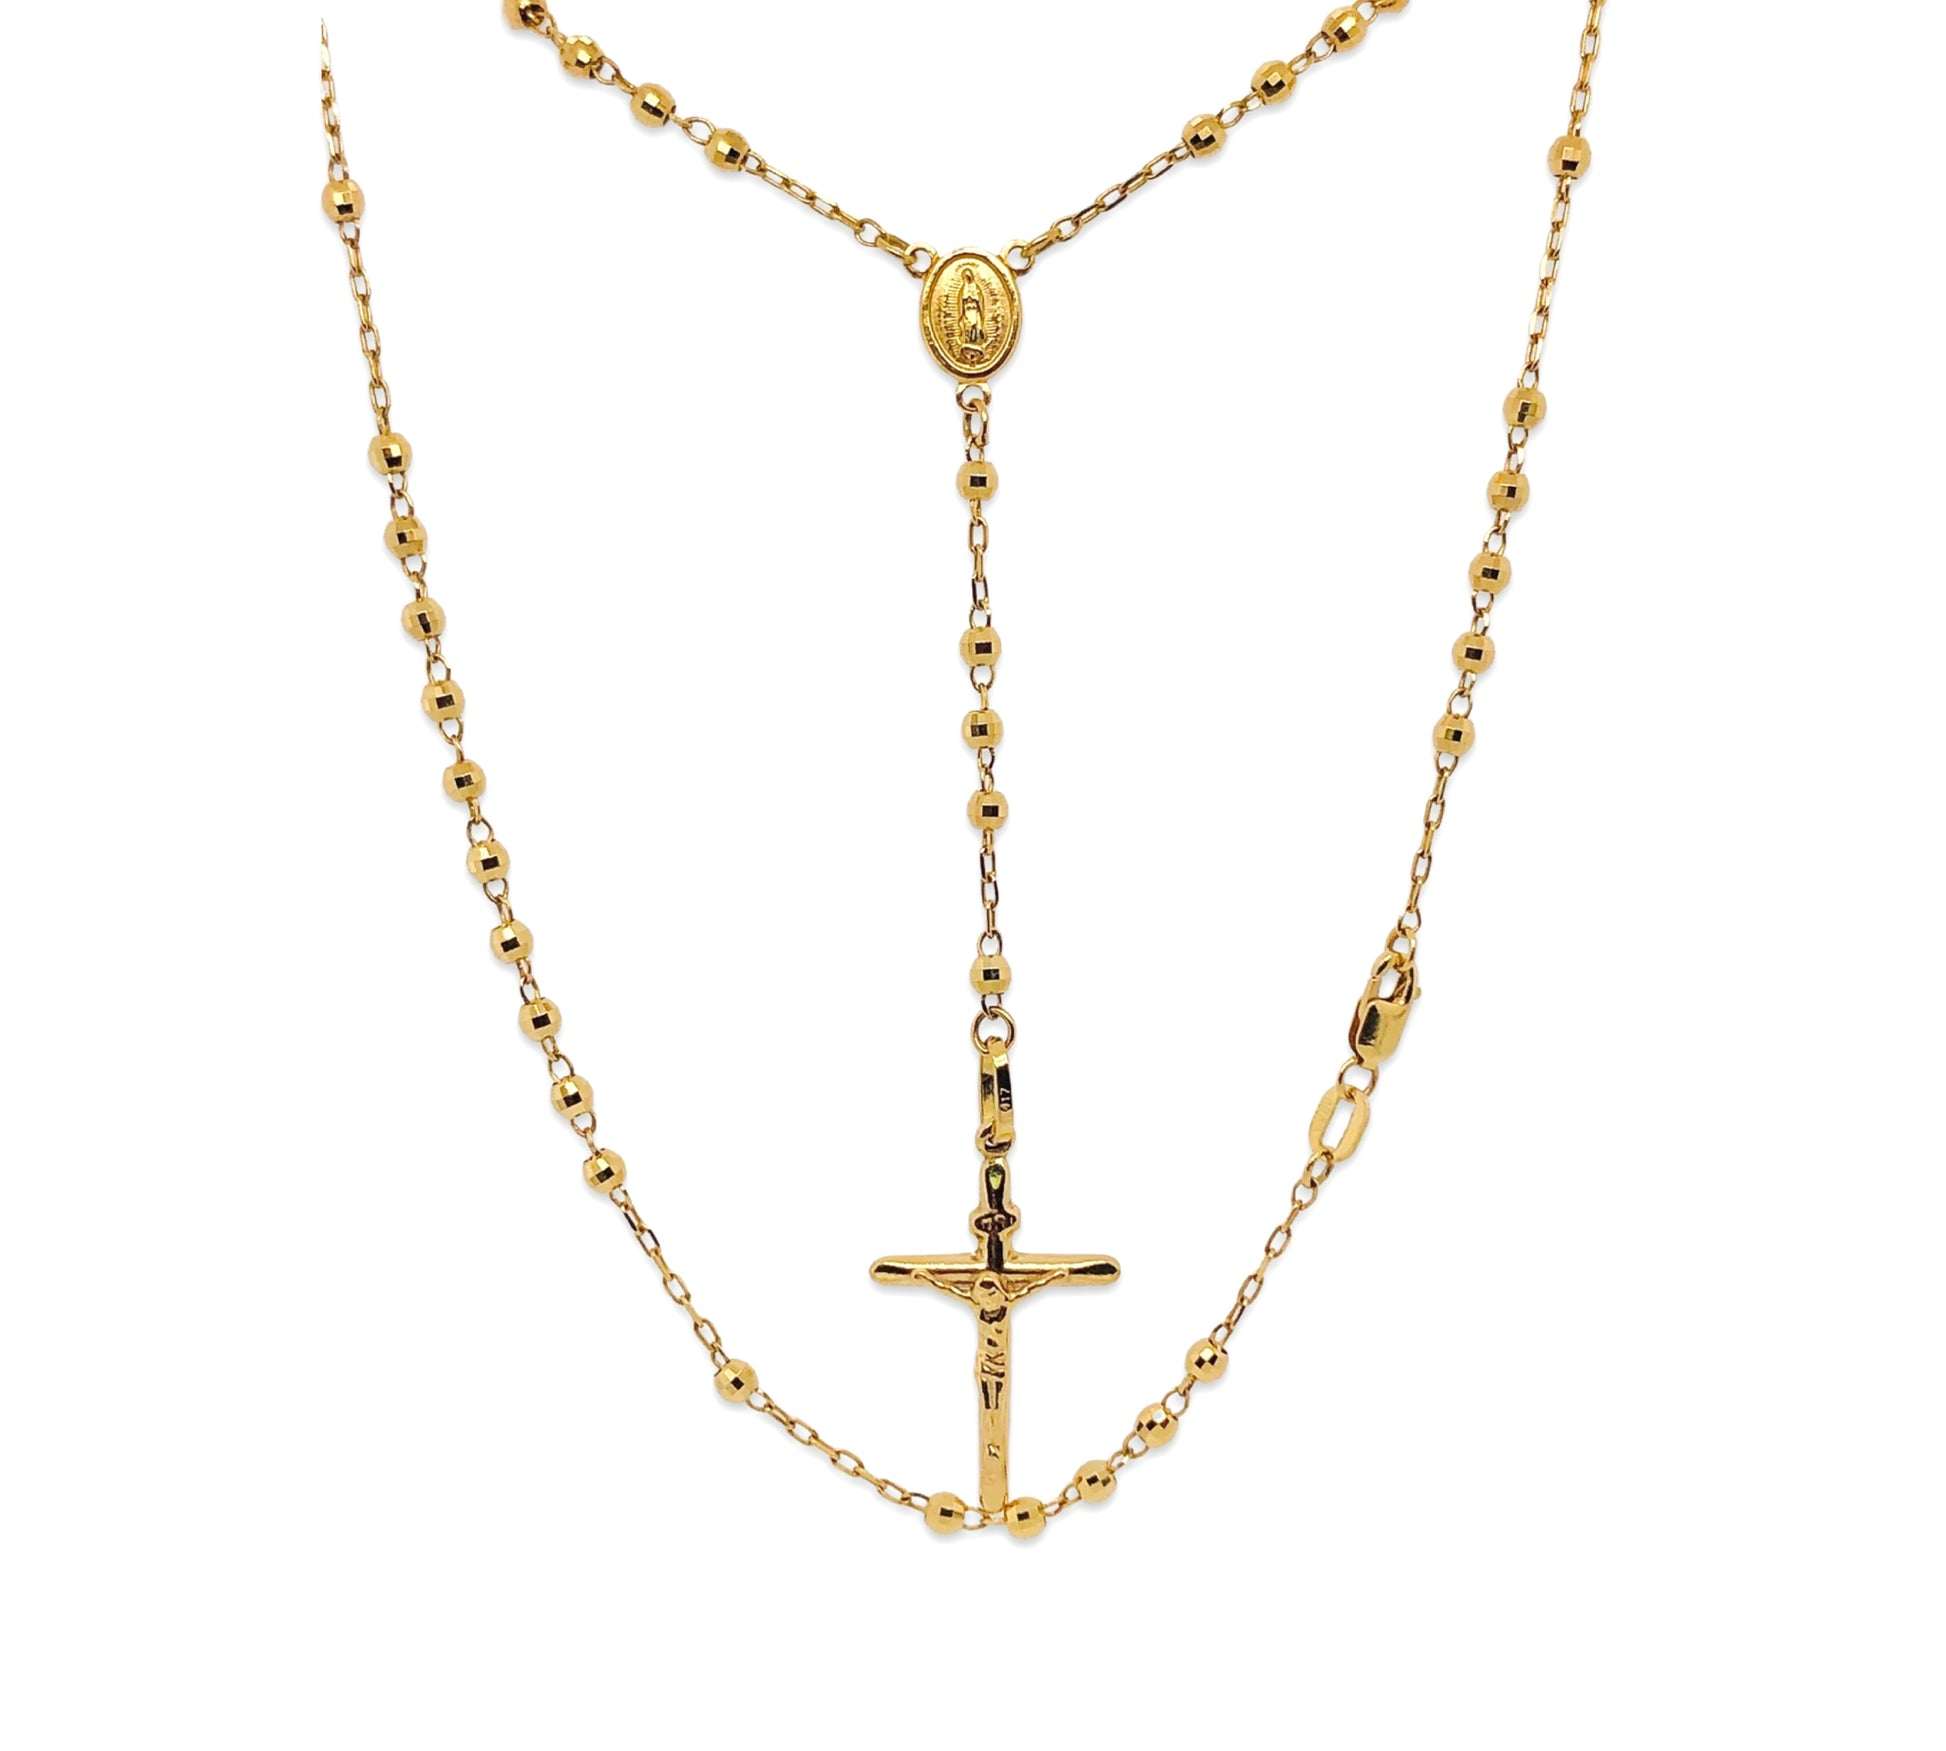 10k yellow gold rosary necklace